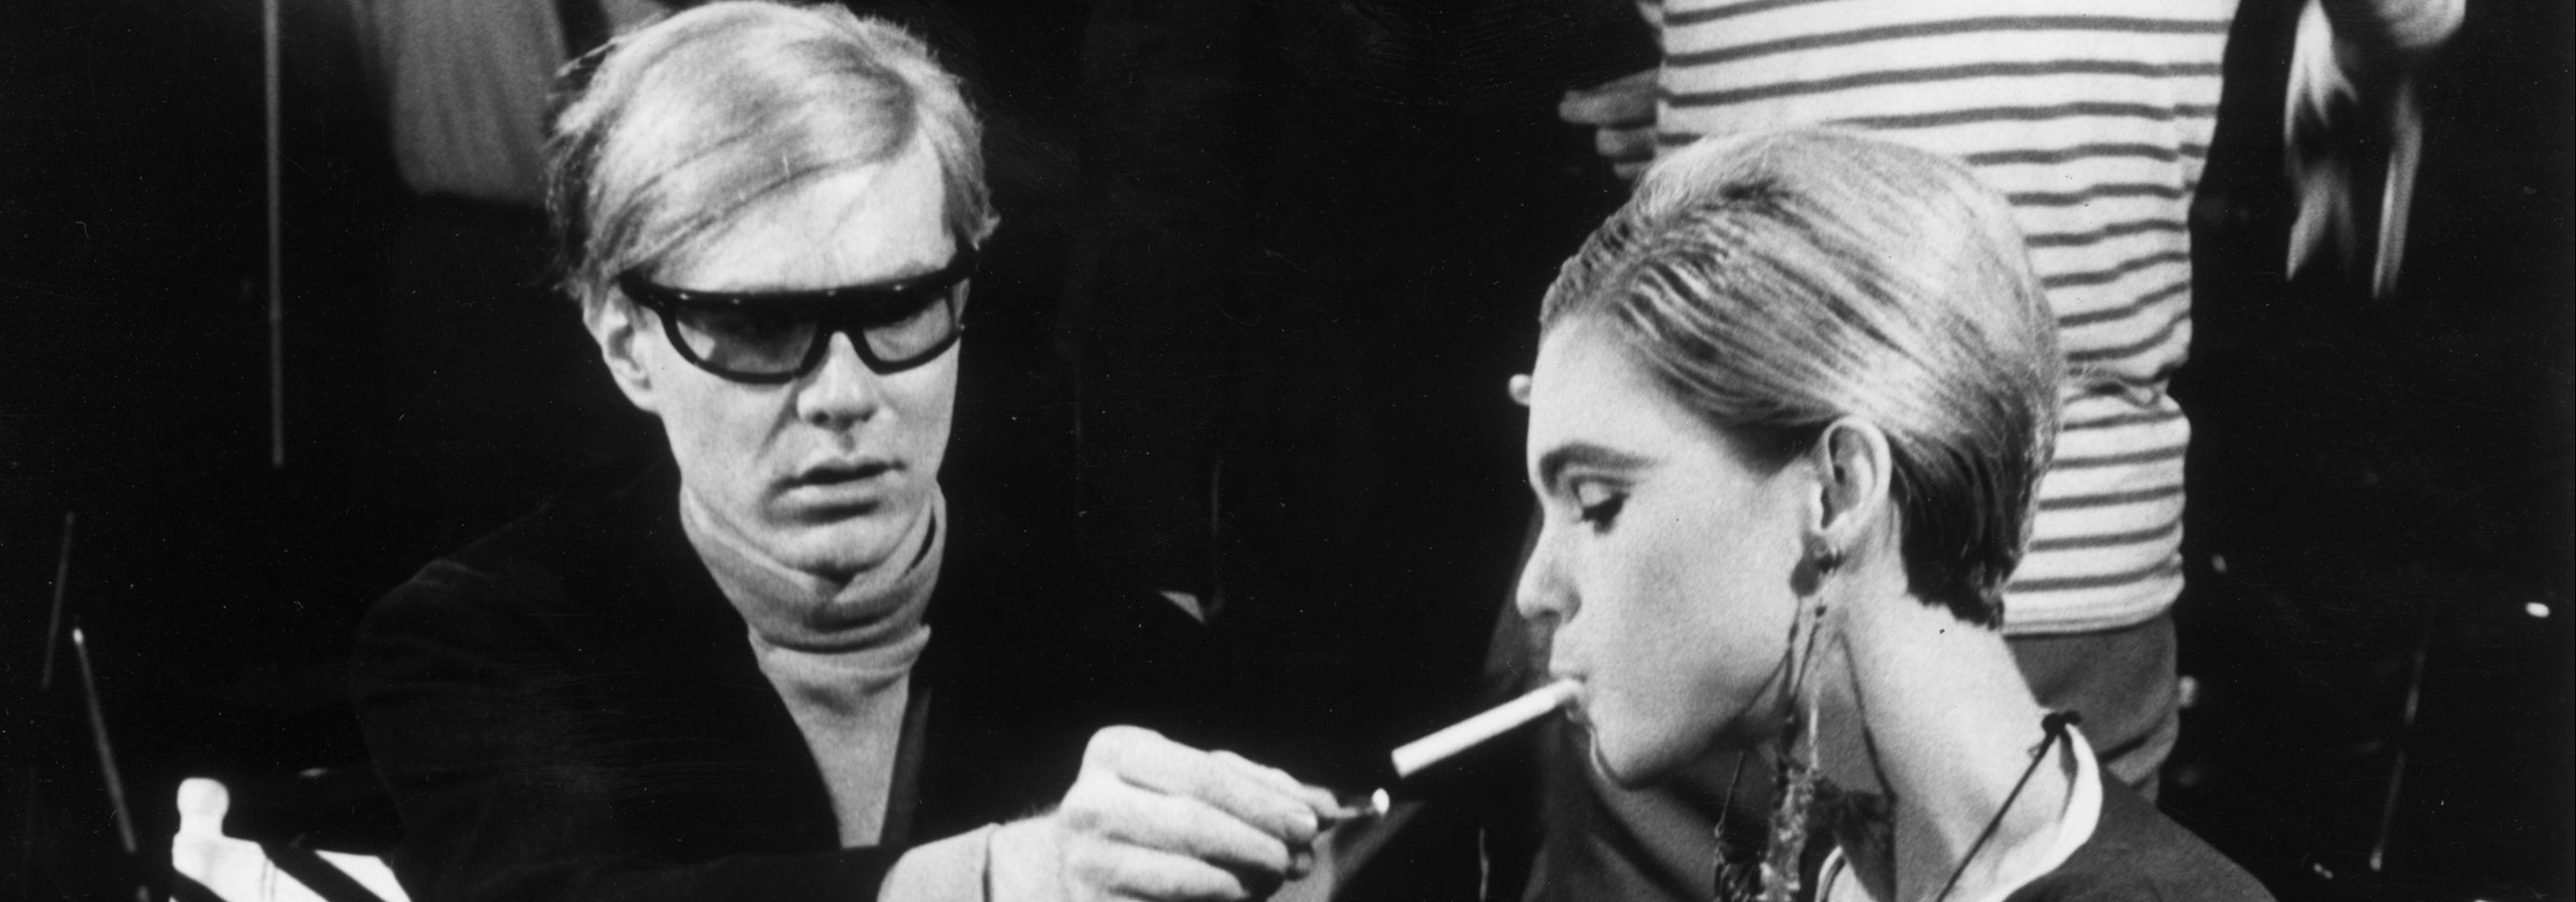 American Pop artist Andy Warhol (1928 - 1987) sits next to actor Edie Sedgwick (1943 - 1971) and lights her cigarette, on the set of one of his films.  (Walter Daran/Hulton Archive/Getty Images)